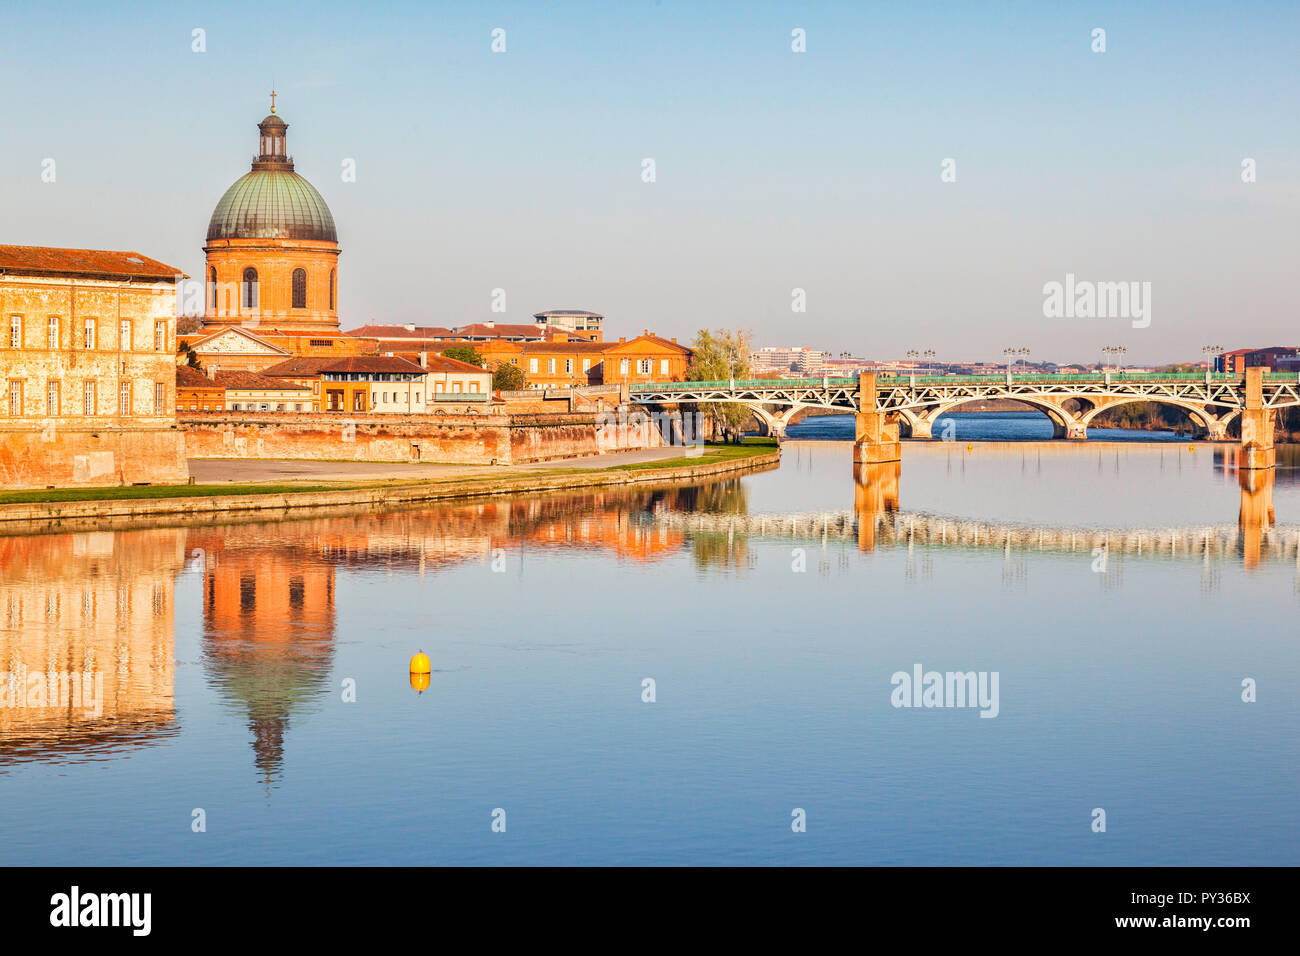 The Saint Pierre Bridge and the dome of the La Grace Hospital reflecting in the Garonne, Toulouse, Stock Photo